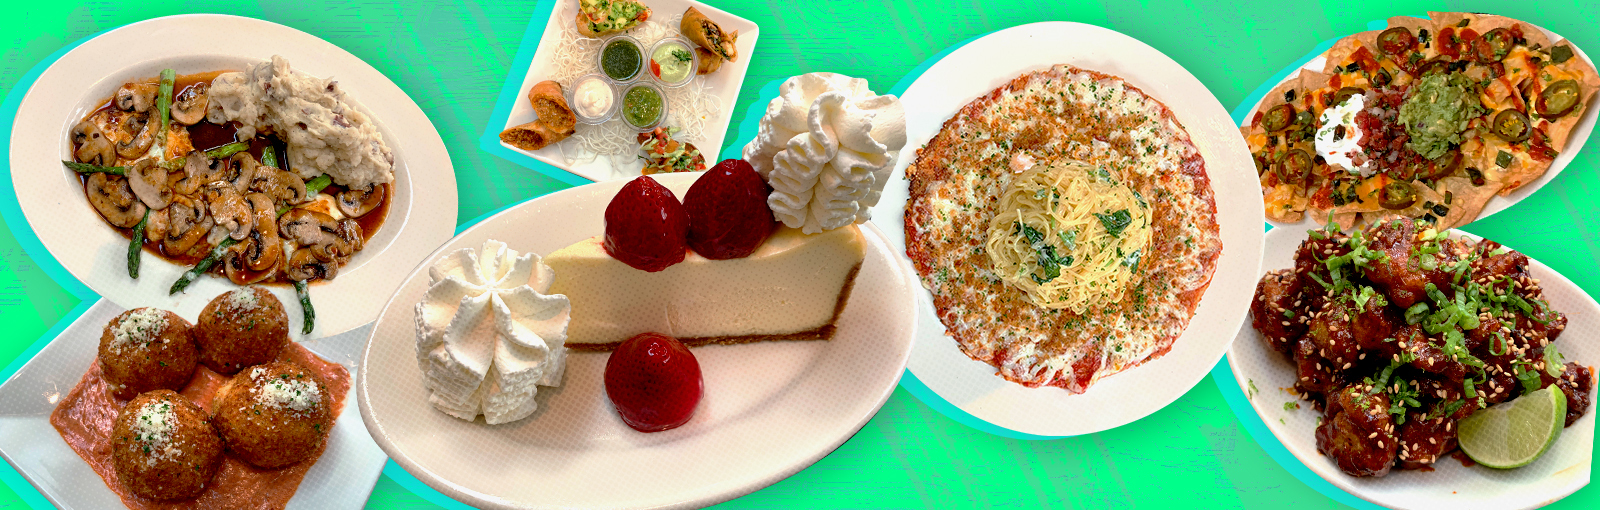 We Tried A Whole Ton Of Dishes From The Cheesecake Factory Here S What To Order And What To Skip - guess the emoji roblox trophy and cake